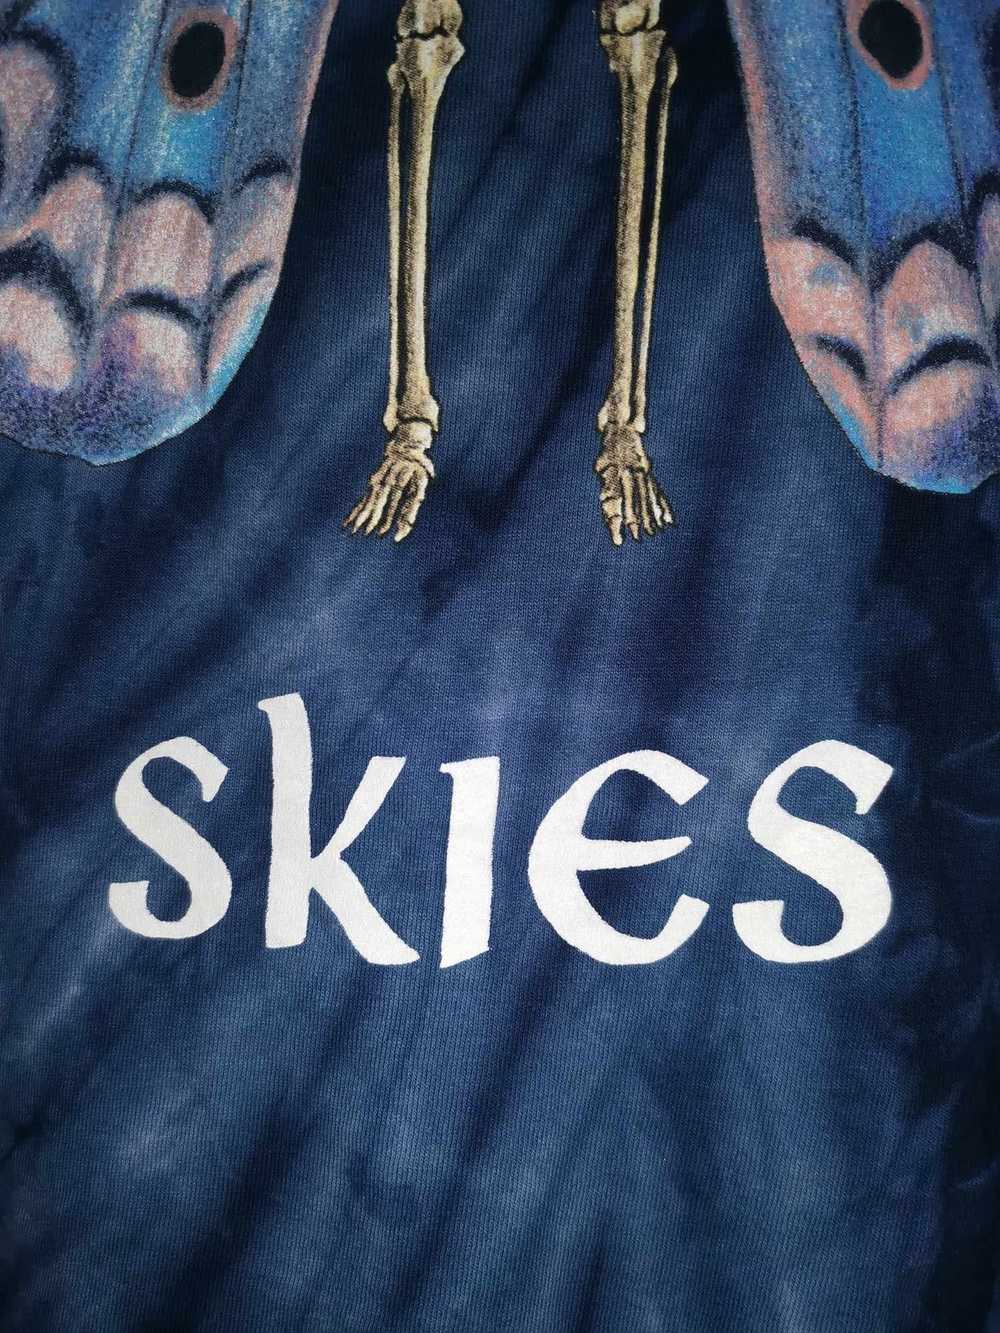 Tour Tee Lil Skies Shelby Tour T-Shirt - image 3